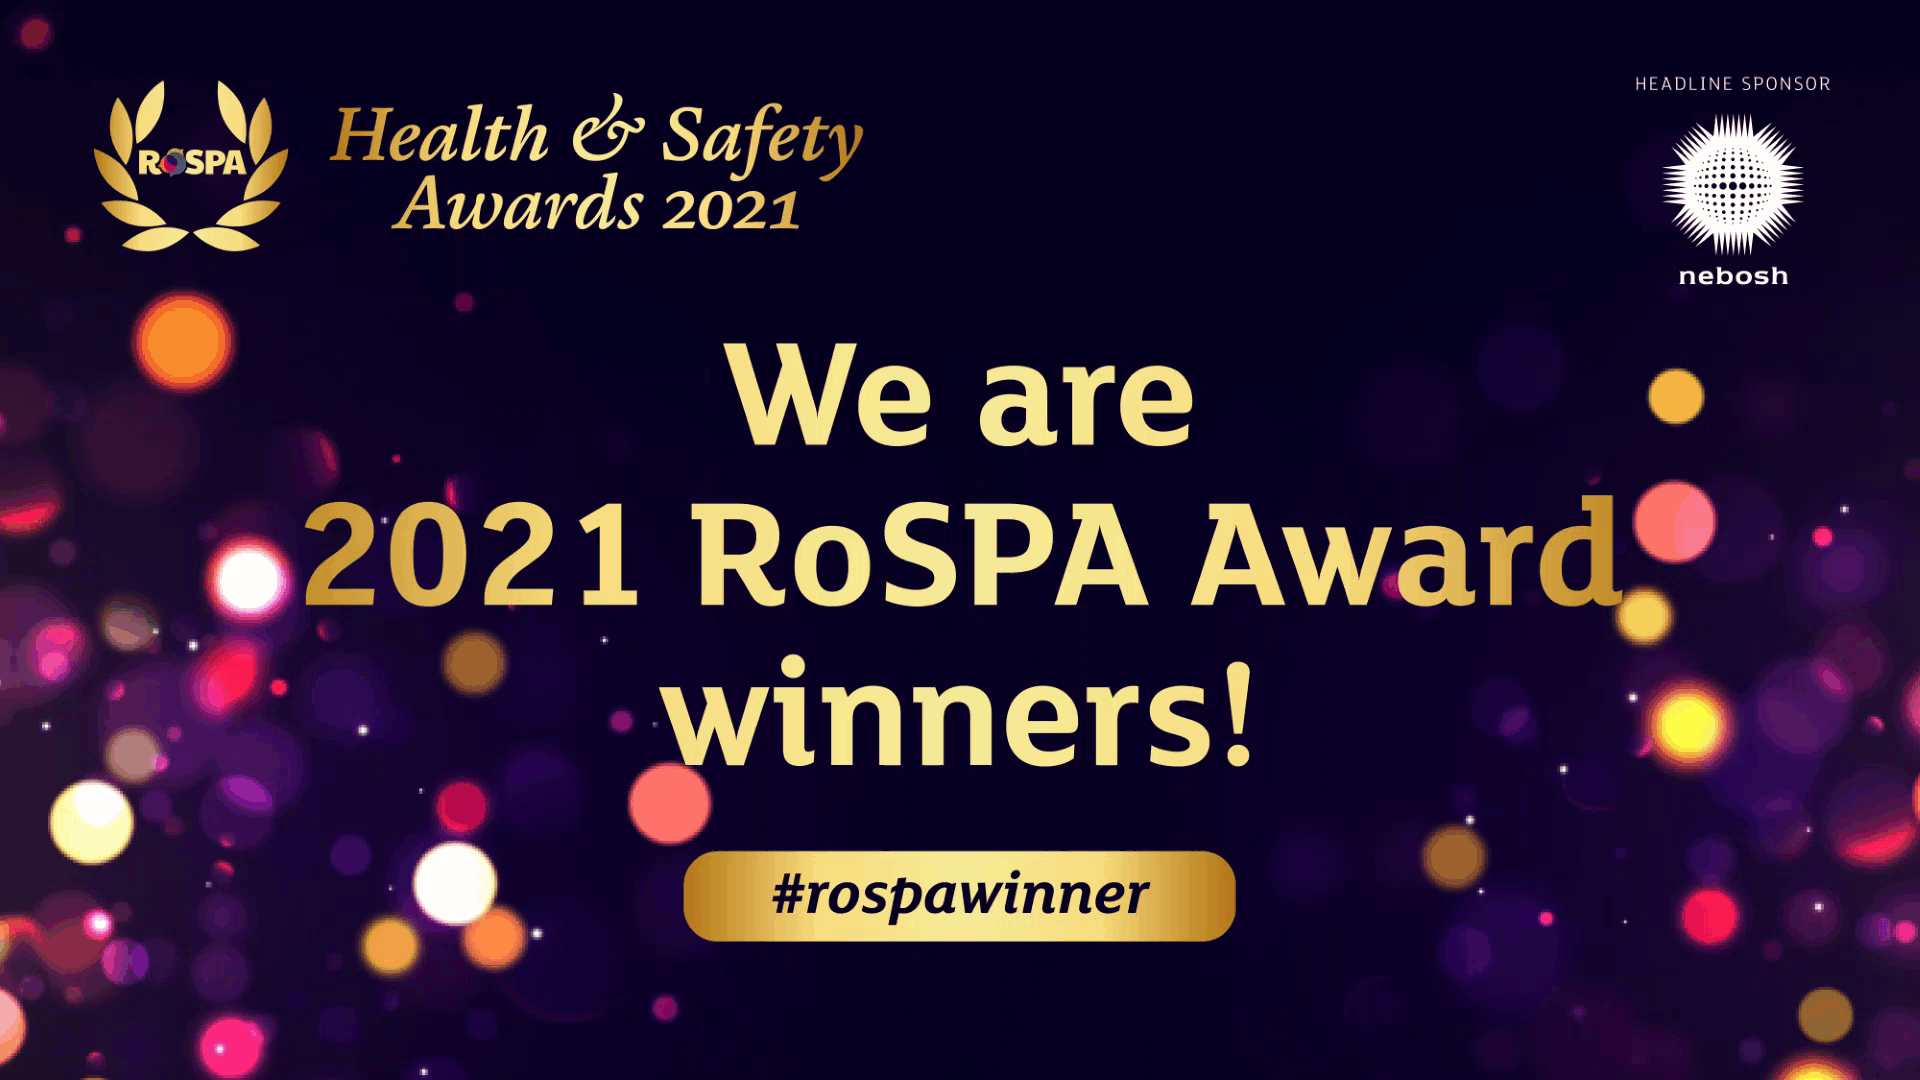 Unispace in EMEA awarded a Gold RoSPA for outstanding health and safety practices